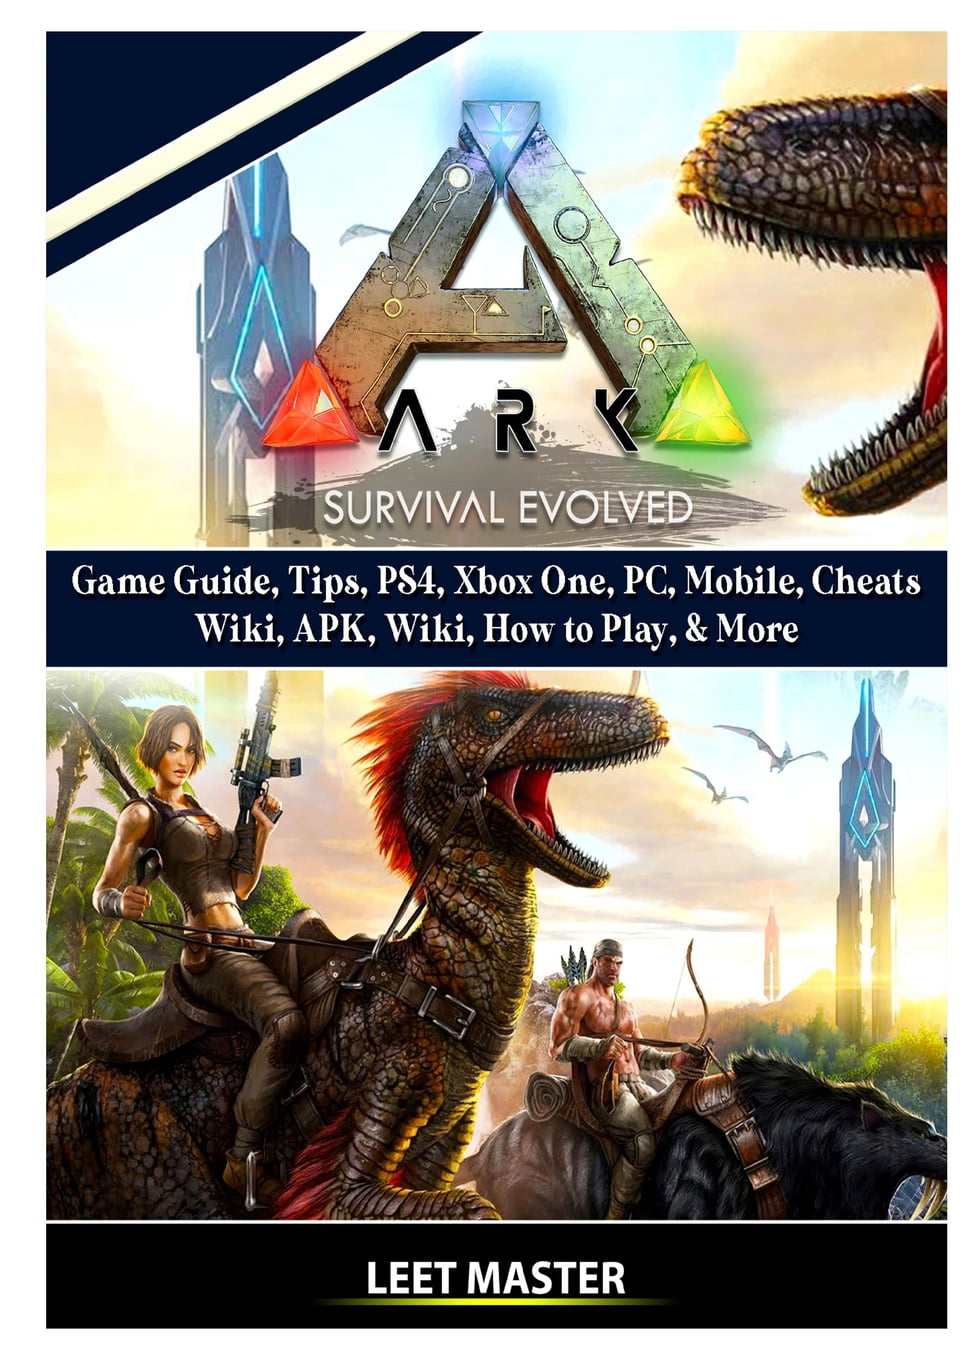 Embryo Zonsverduistering Dertig Ark Survival Evolved Game Guide, Tips, PS4, Xbox One, PC, Mobile, Cheats,  Wiki, APK, Wiki, How to Play, & More (Paperback) - Walmart.com